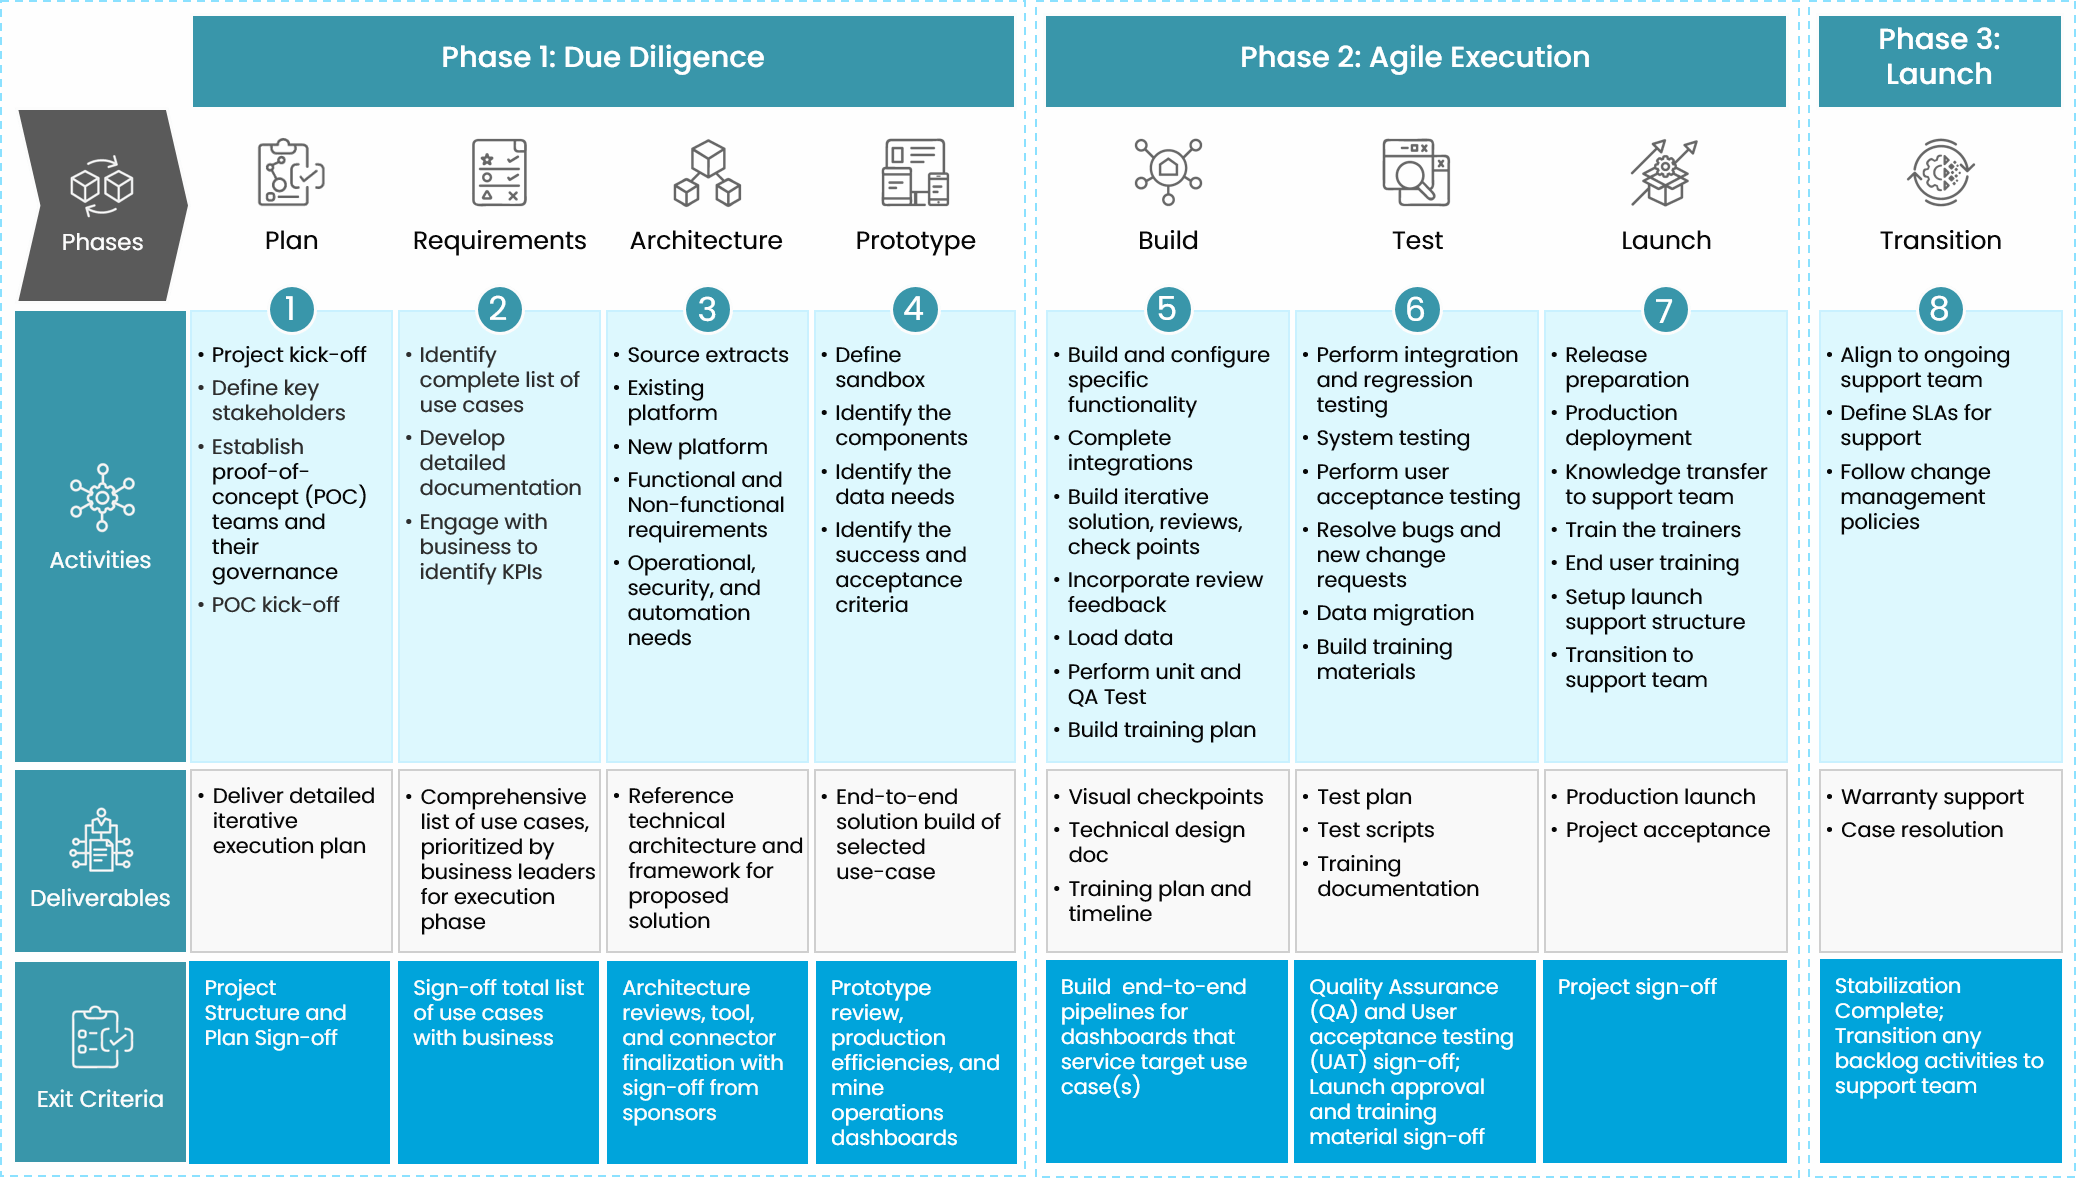 An infographic showing the three phases of big data analytics